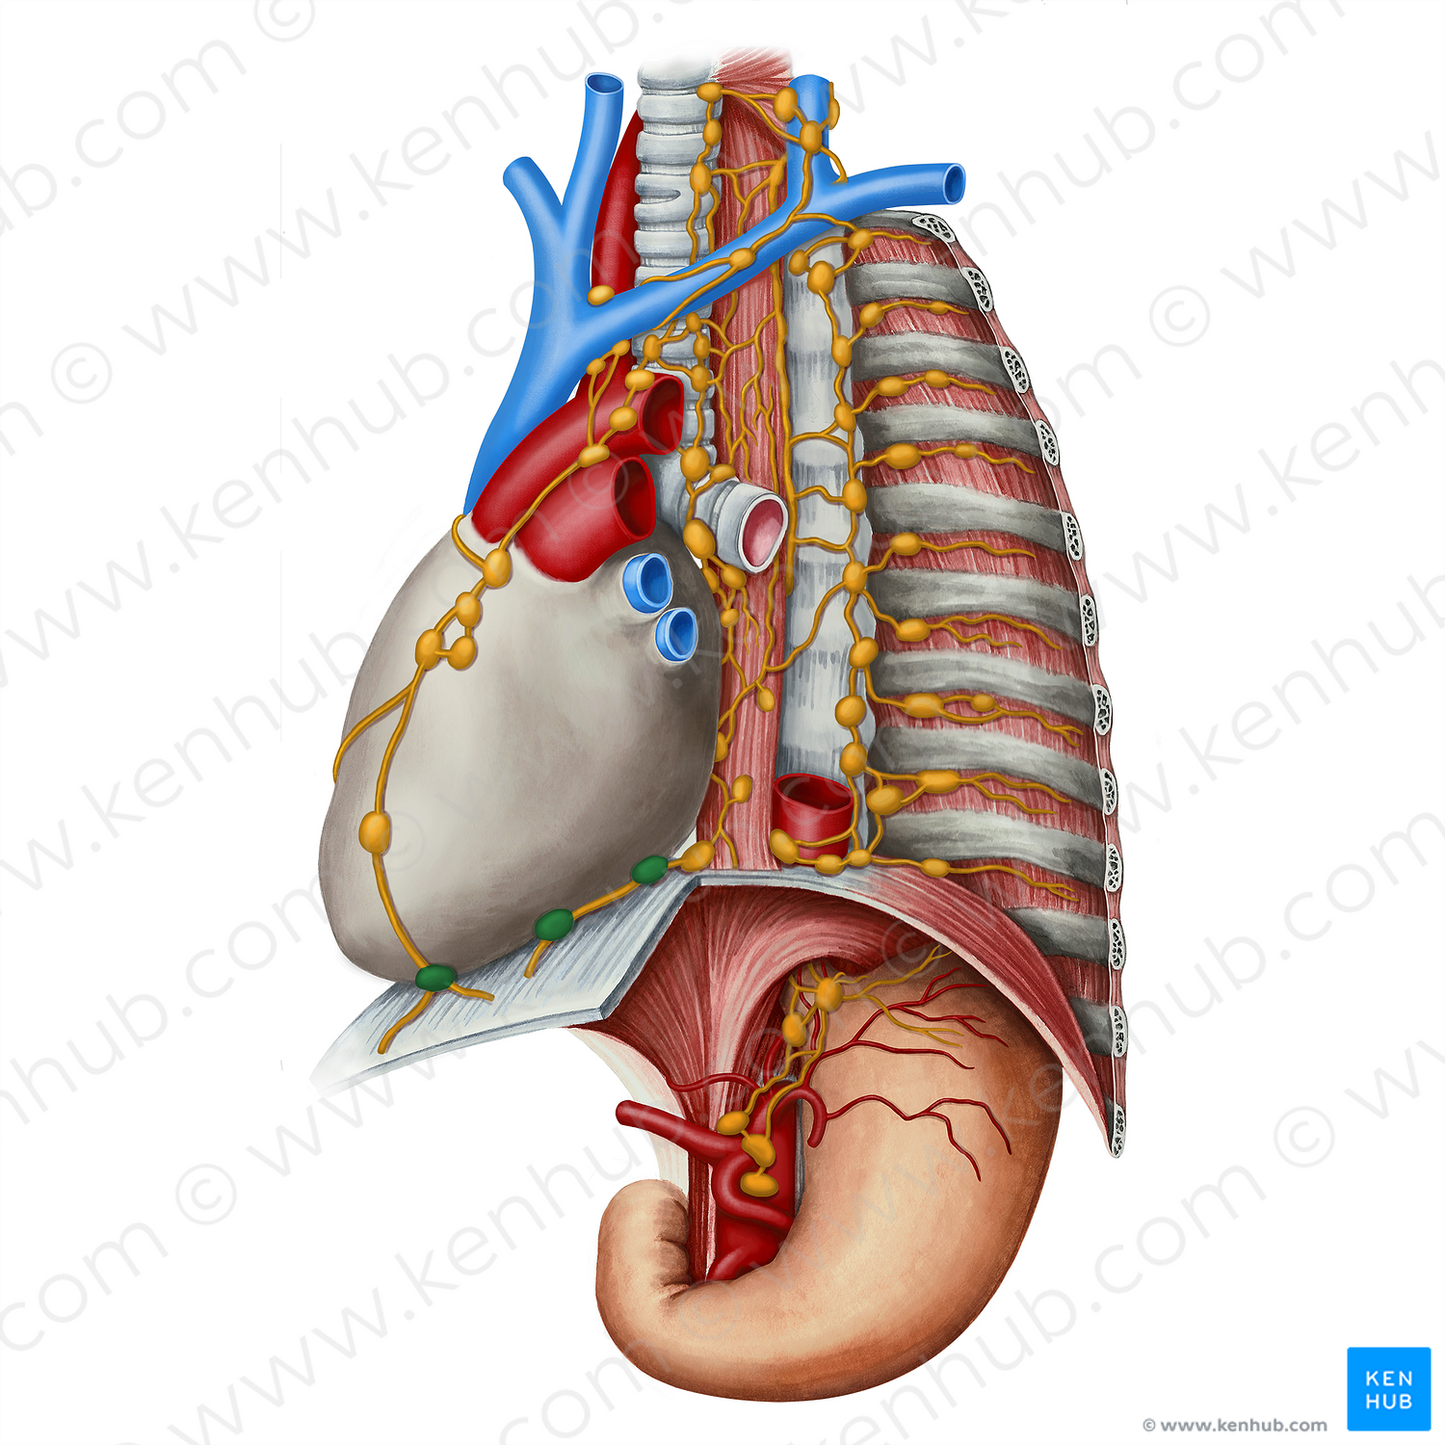 Lateral pericardial lymph nodes (#21826)